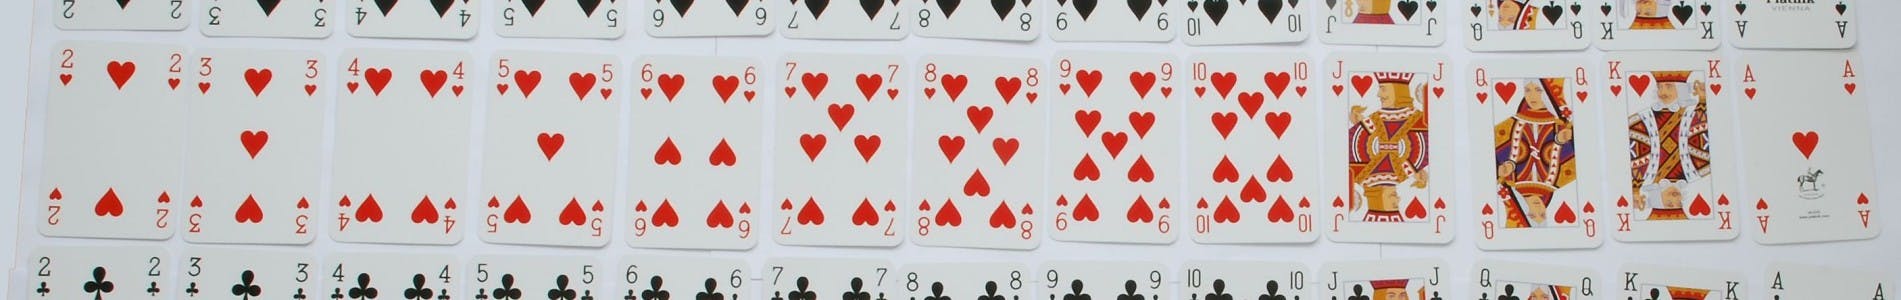 52 card deck implemented using dart 3